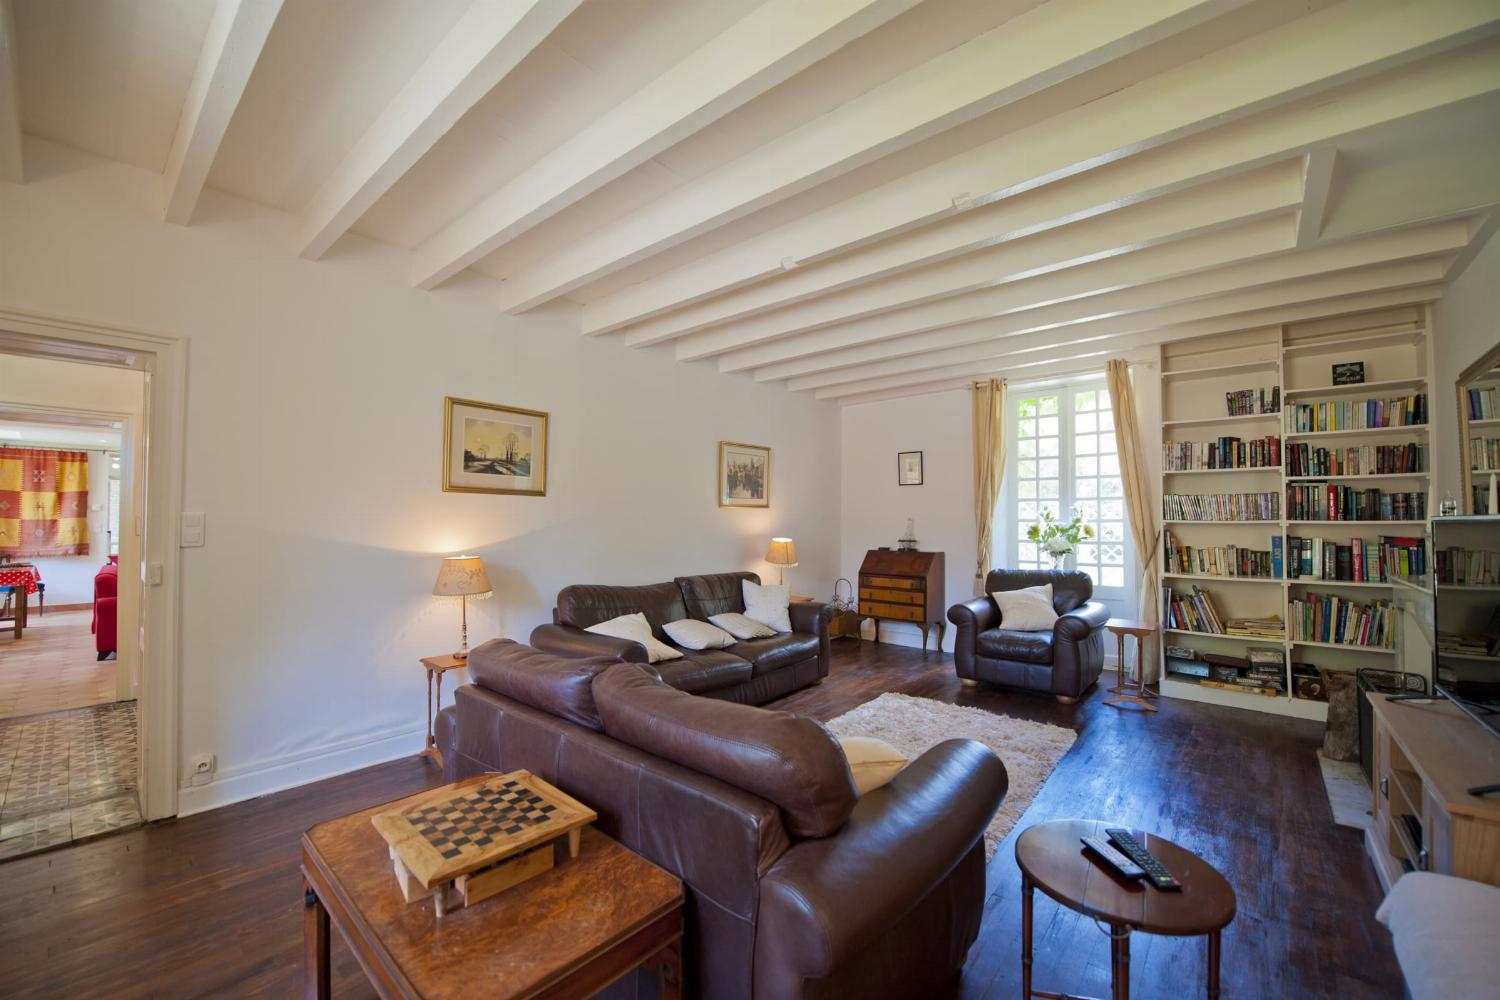 Living room | Rental accommodation in Charente